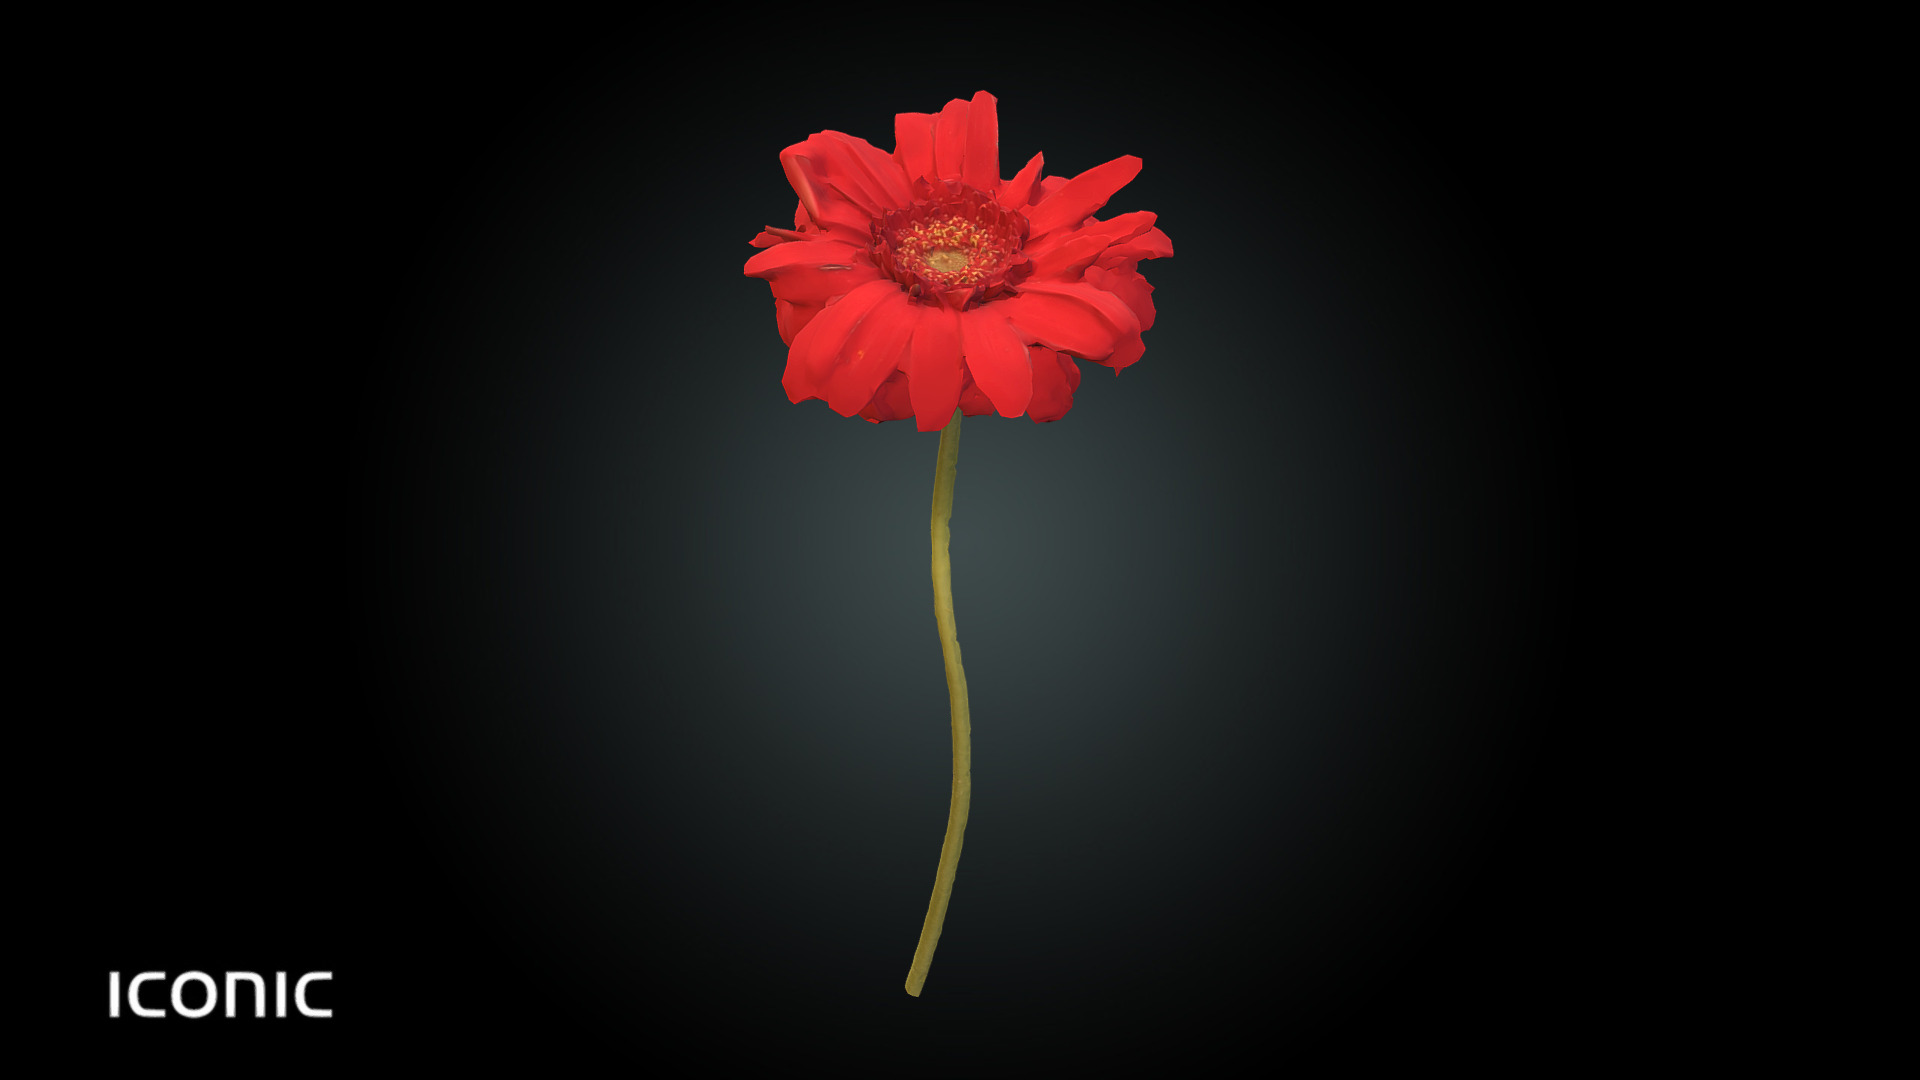 3D model Fw3 – Chrysantemum Amaranth - This is a 3D model of the Fw3 - Chrysantemum Amaranth. The 3D model is about a red flower with a yellow stem.